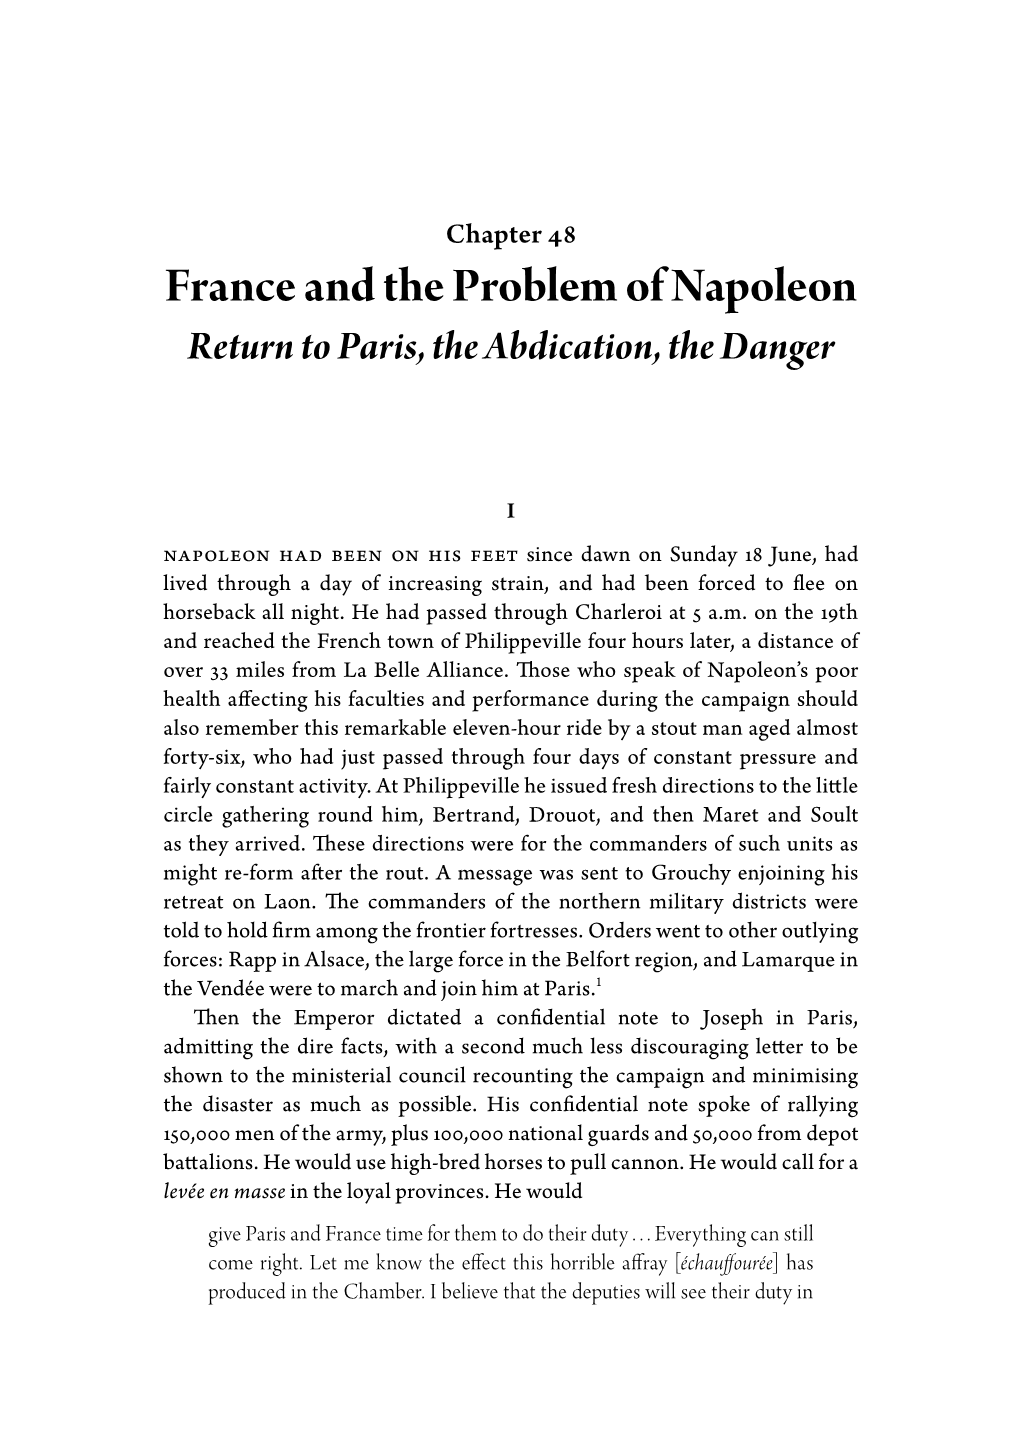 Chapter 48 France and the Problem of Napoleon Return to Paris, the Abdication, the Danger